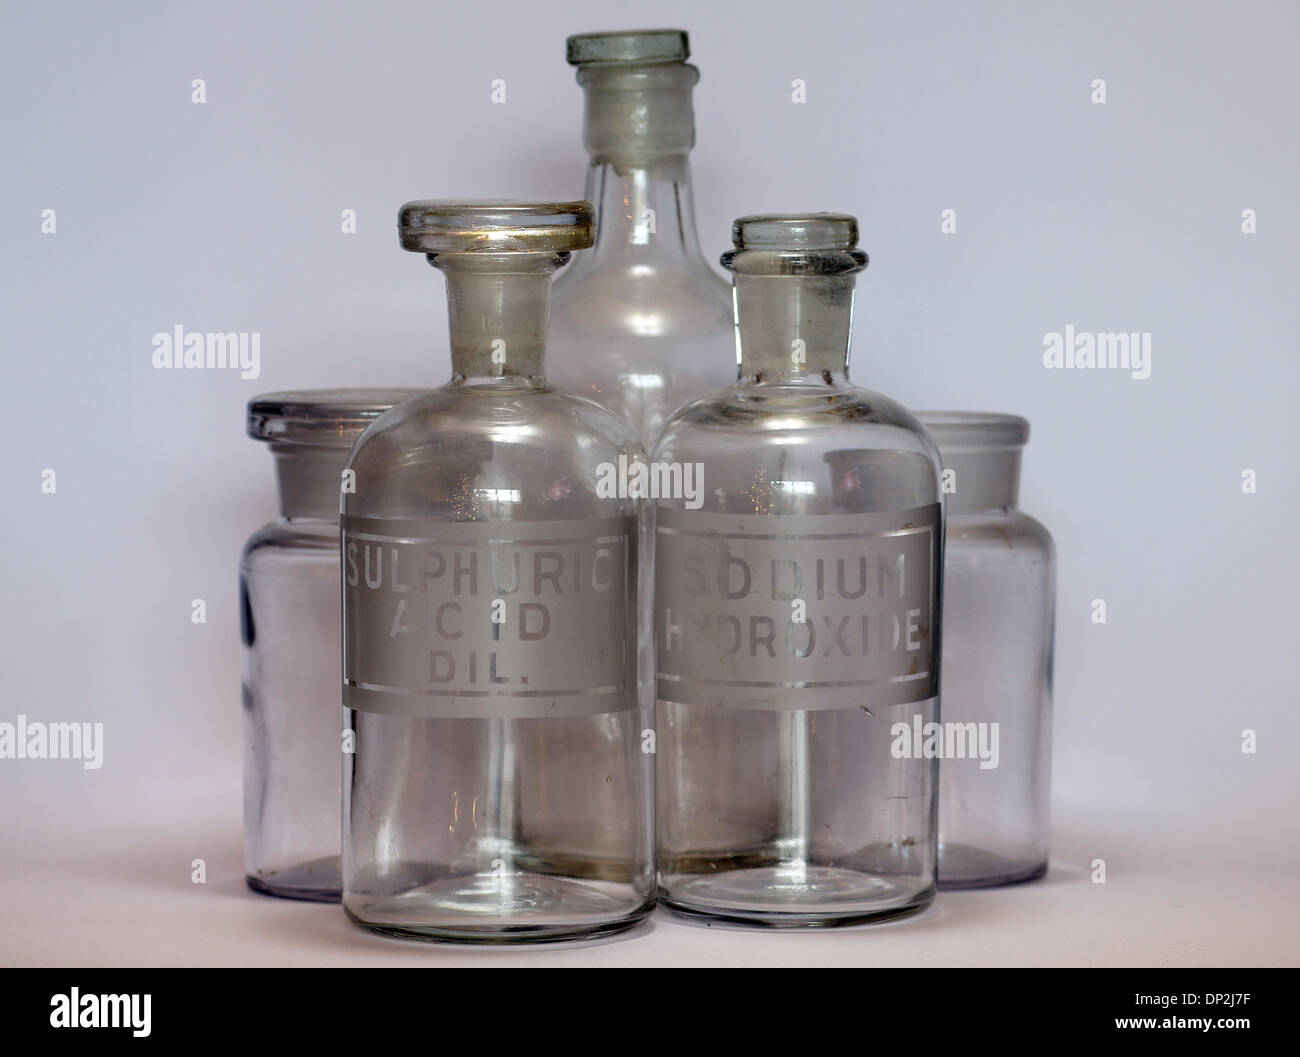 old chemistry bottle labeled for Sulphuric Acid Diluted and Sodium Hydroxide Stock Photo